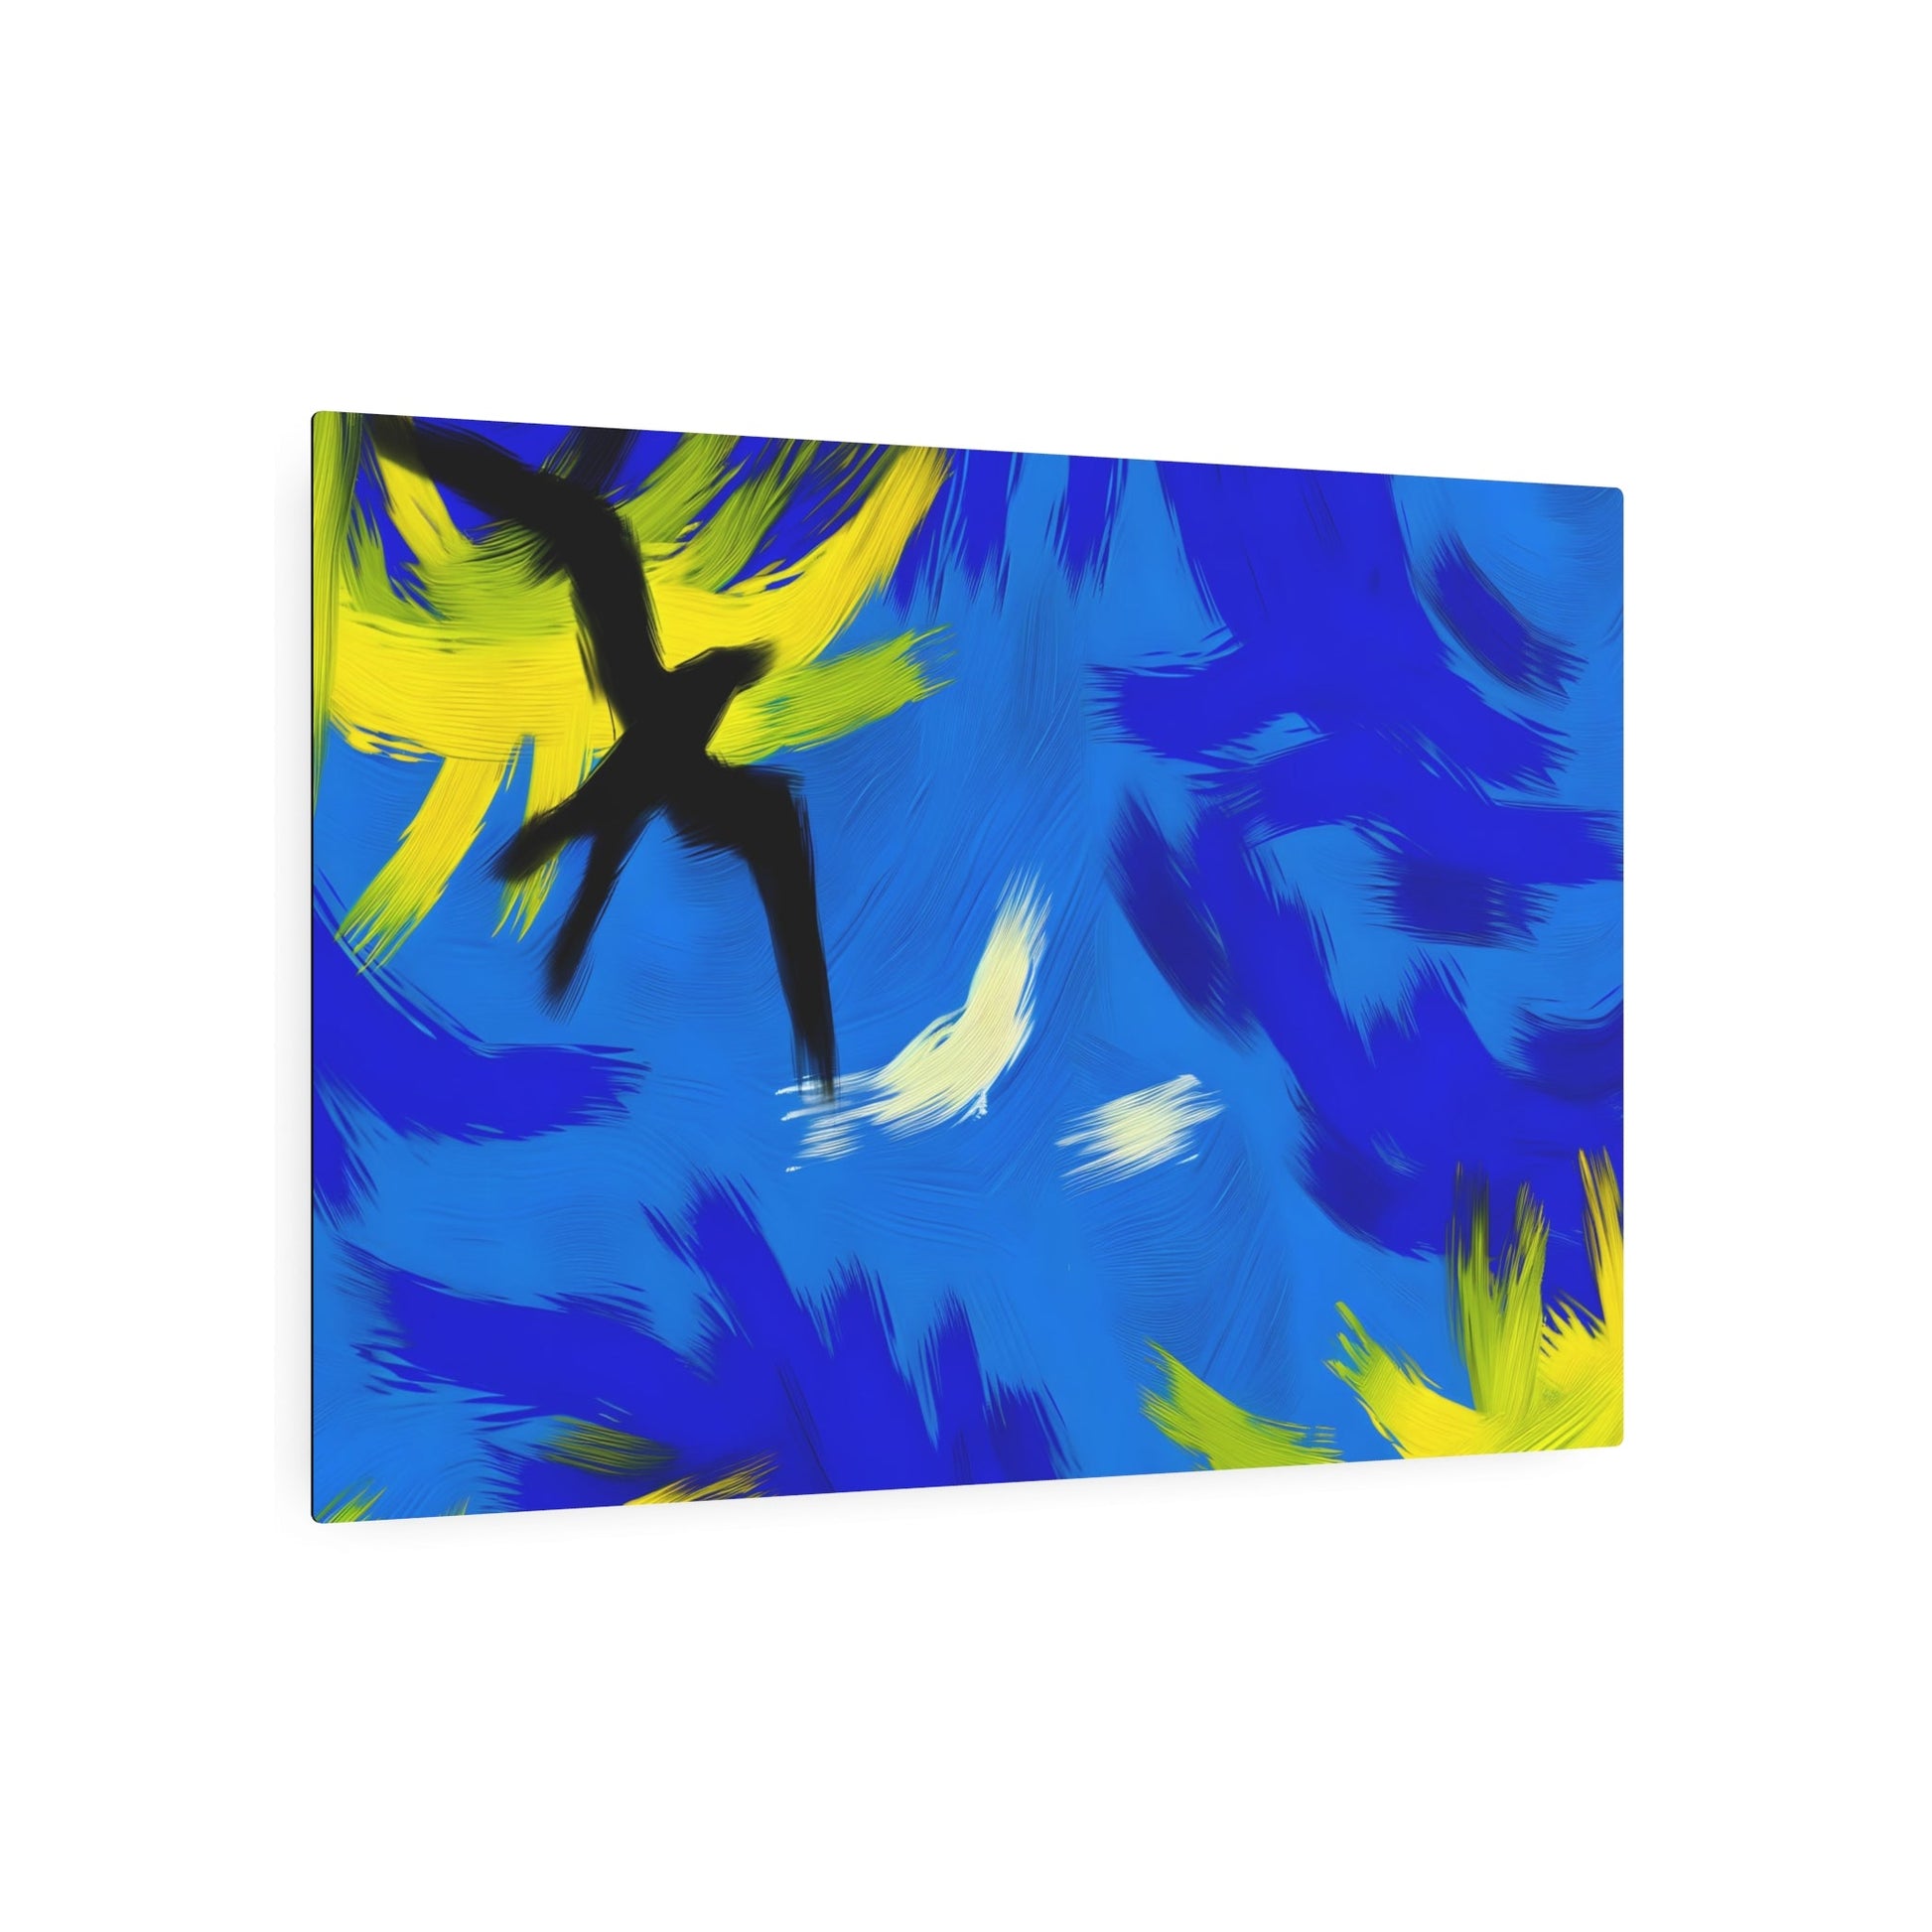 Metal Poster Art | "Abstract Expressionism Art - Modern Contemporary Style Blue and Vibrant Yellow Brush-Stroke Sky with Dynamic Soaring Bird Silhouette" - Metal Poster Art 36″ x 24″ (Horizontal) 0.12''